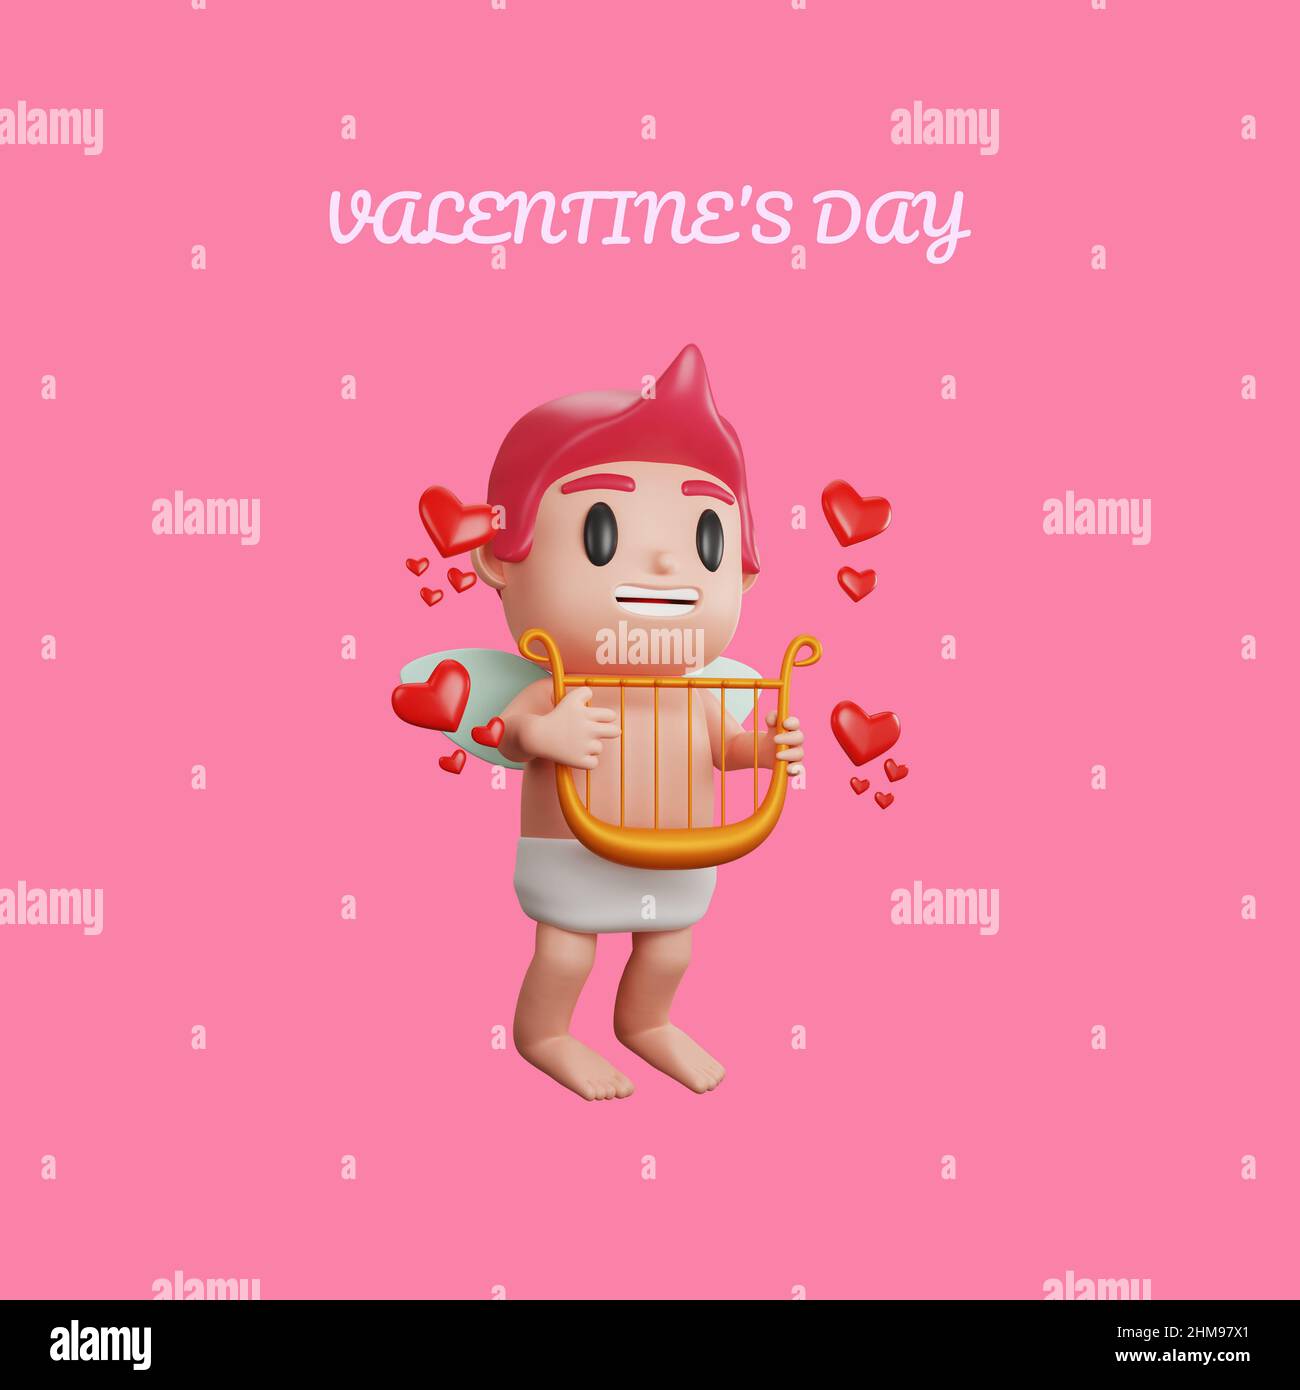 3d rendering of cupid character valentine's day concept Stock Photo